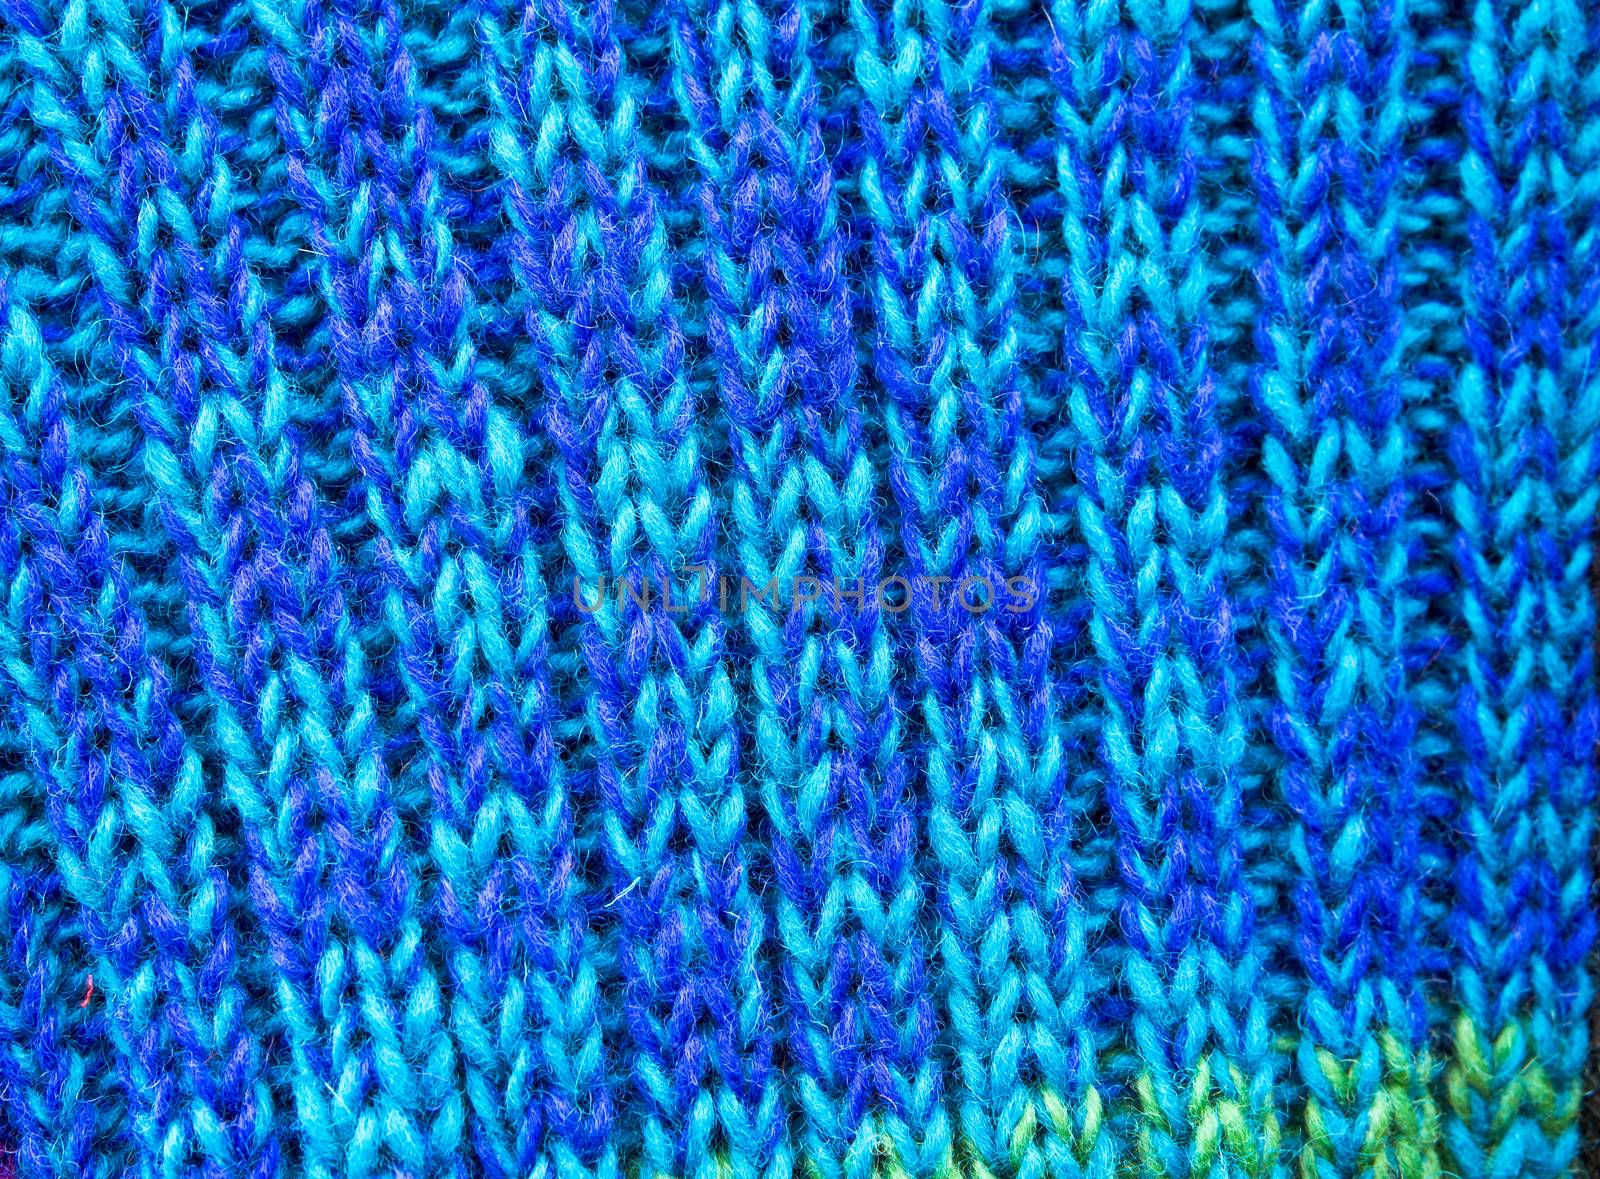 Blue and turquoise wool fabric as a background